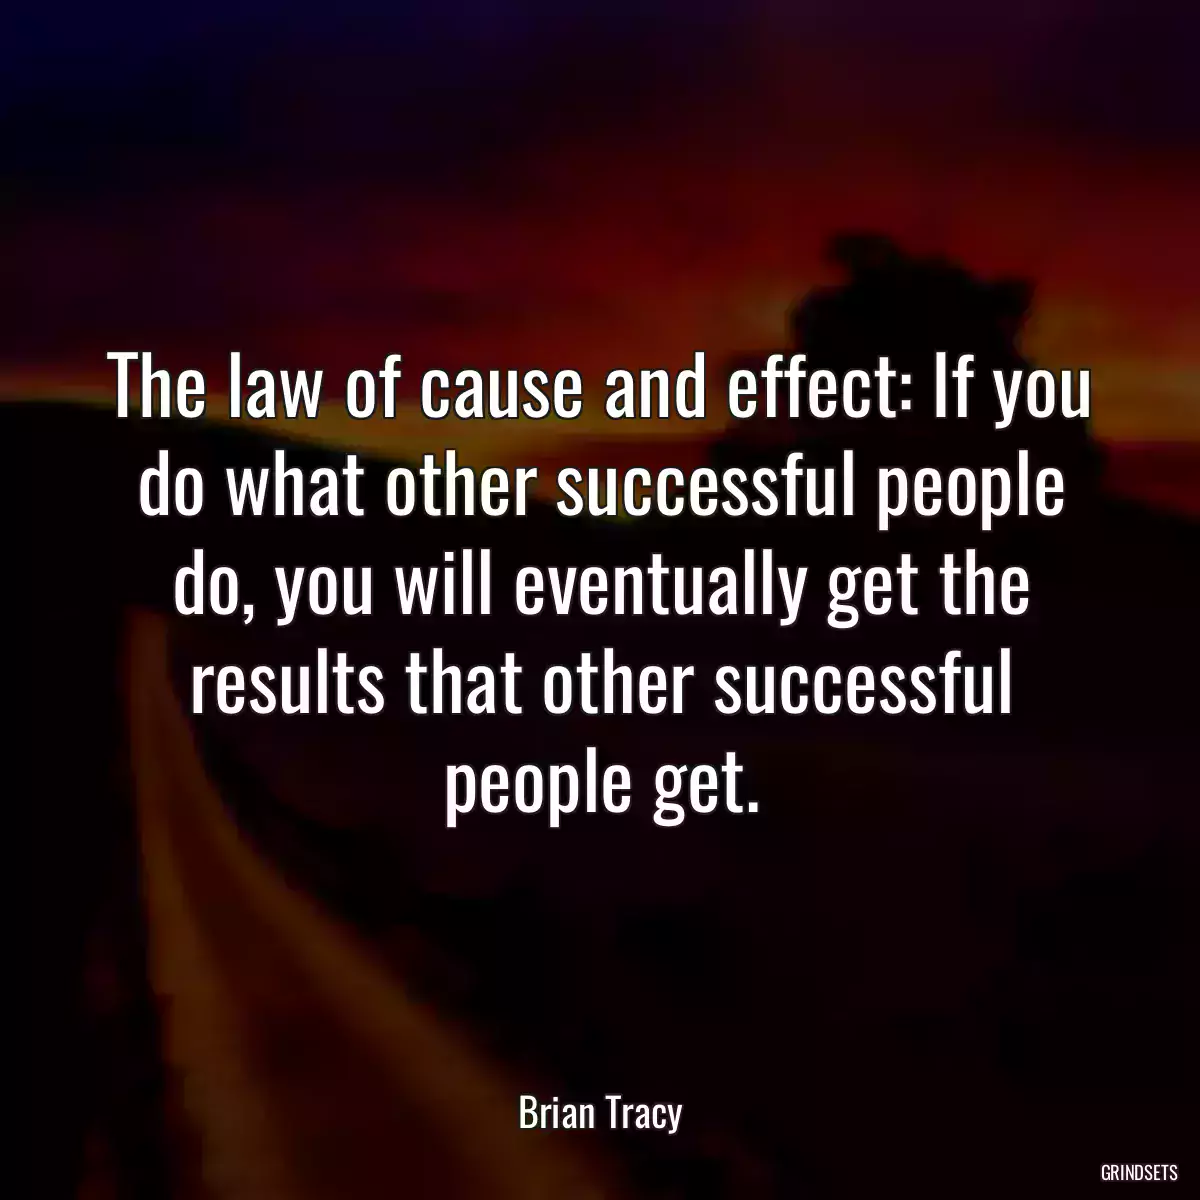 The law of cause and effect: If you do what other successful people do, you will eventually get the results that other successful people get.